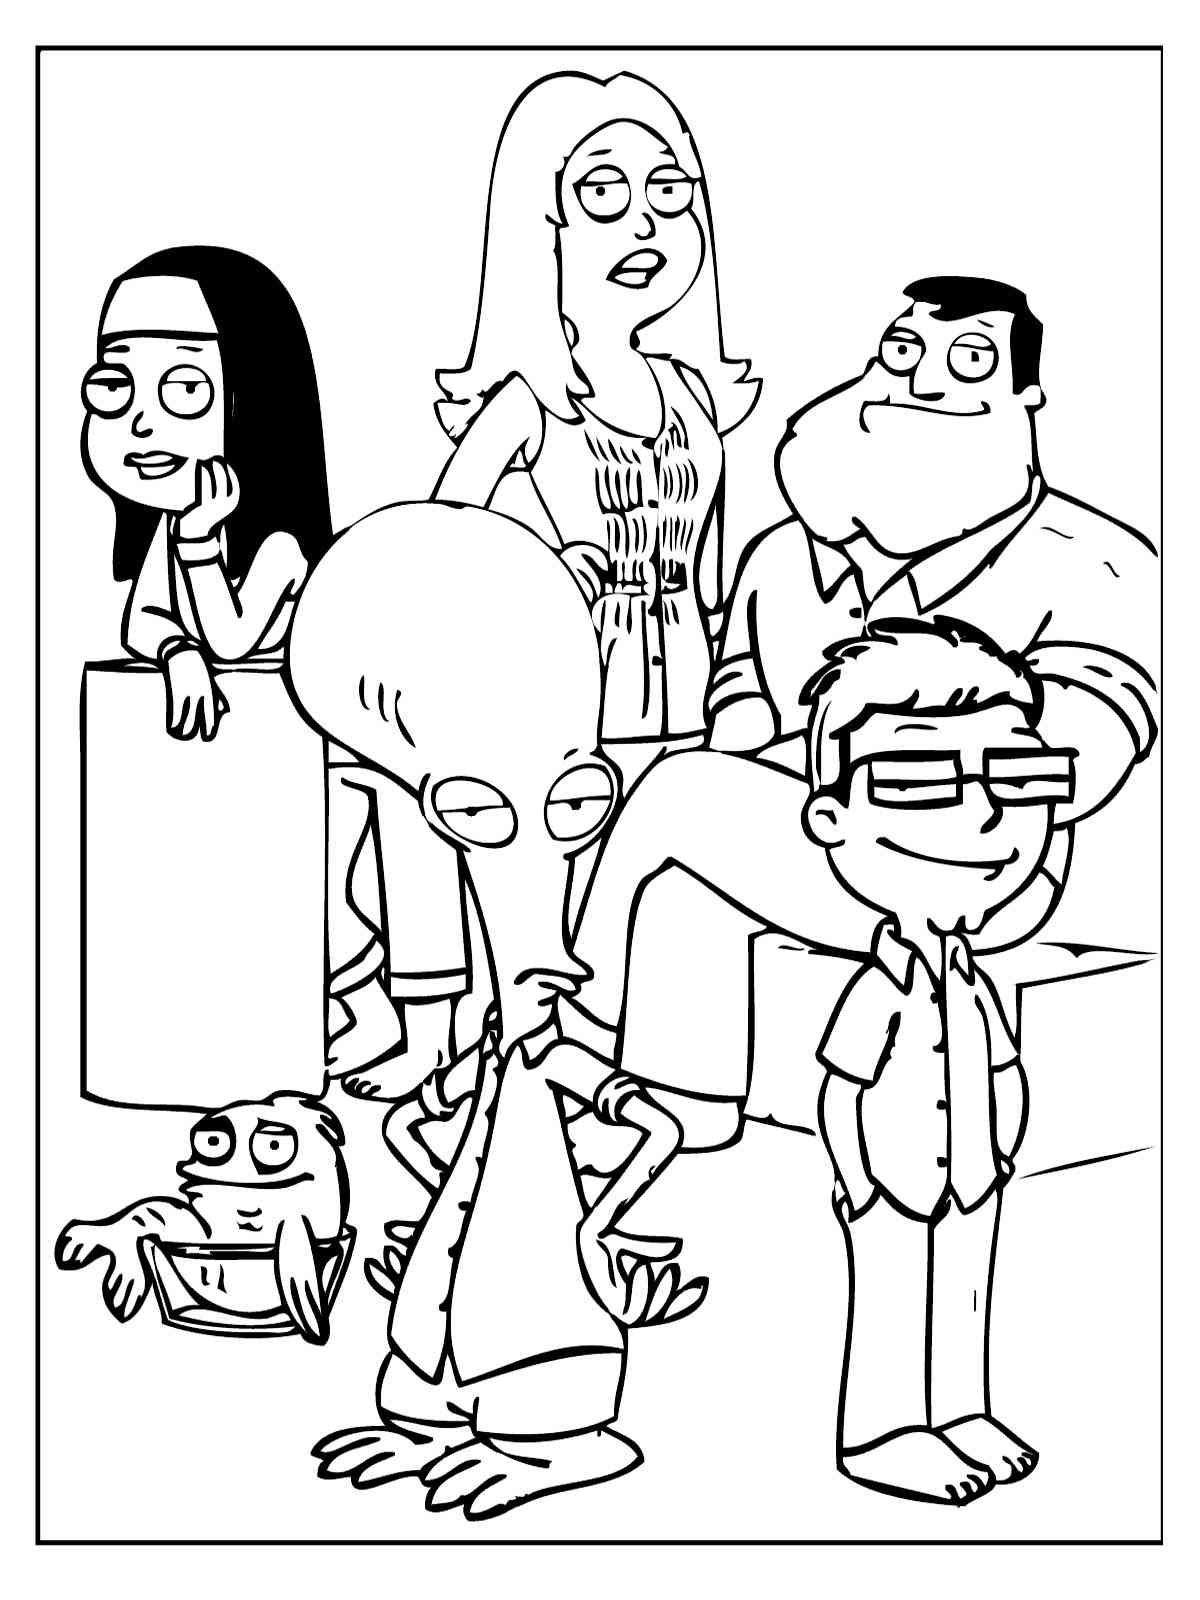 American Dad coloring pages